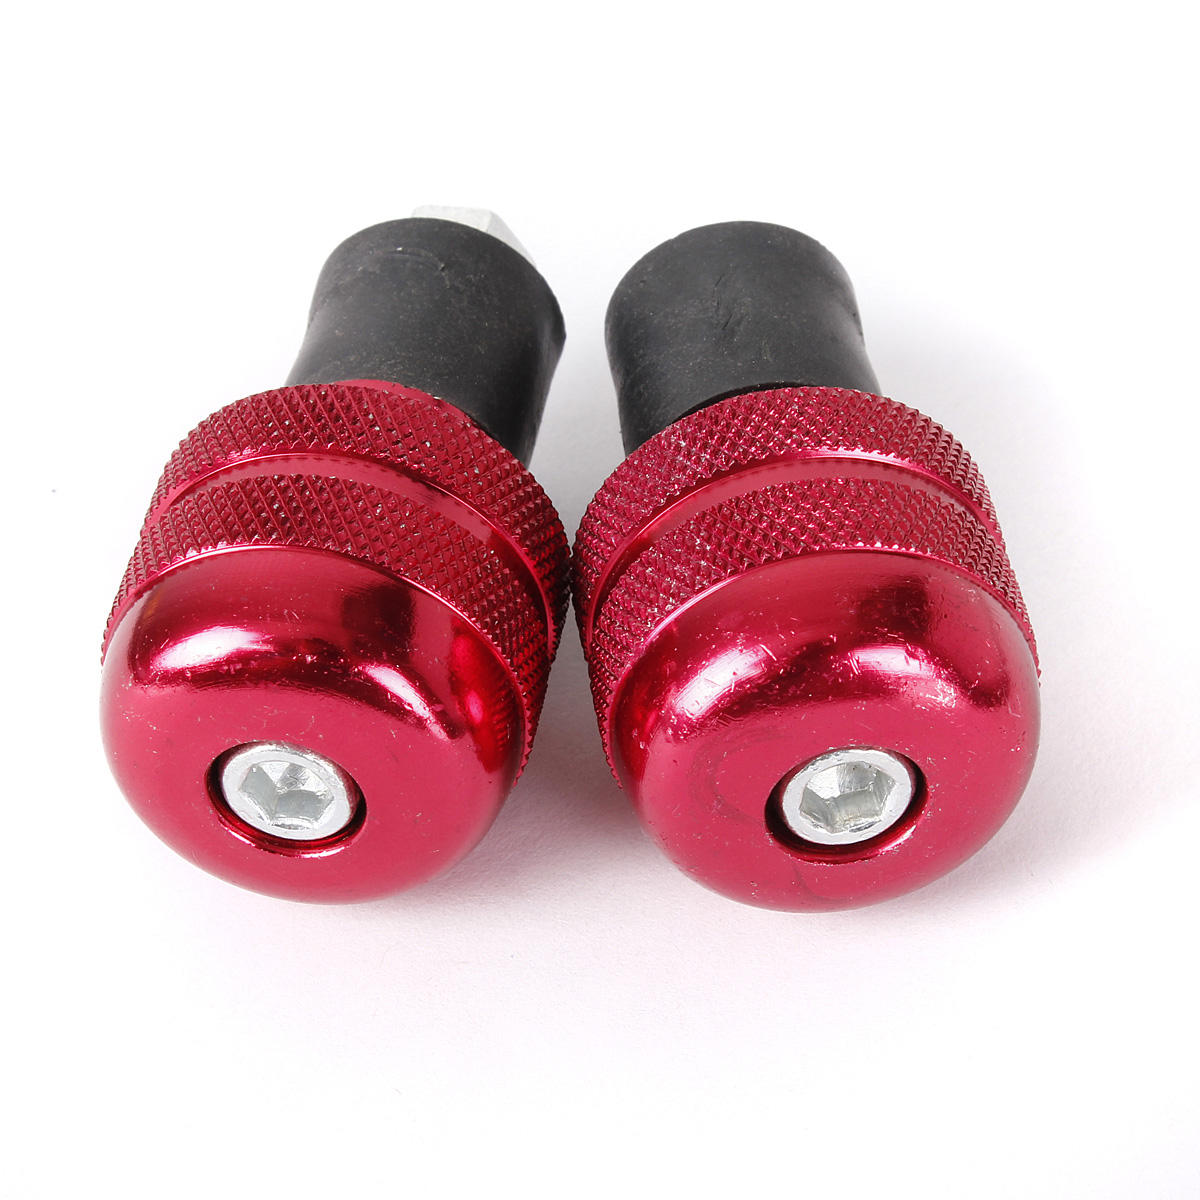 Four Red 22mm Motorcycle Round Handlebar End Weight Balance Plug